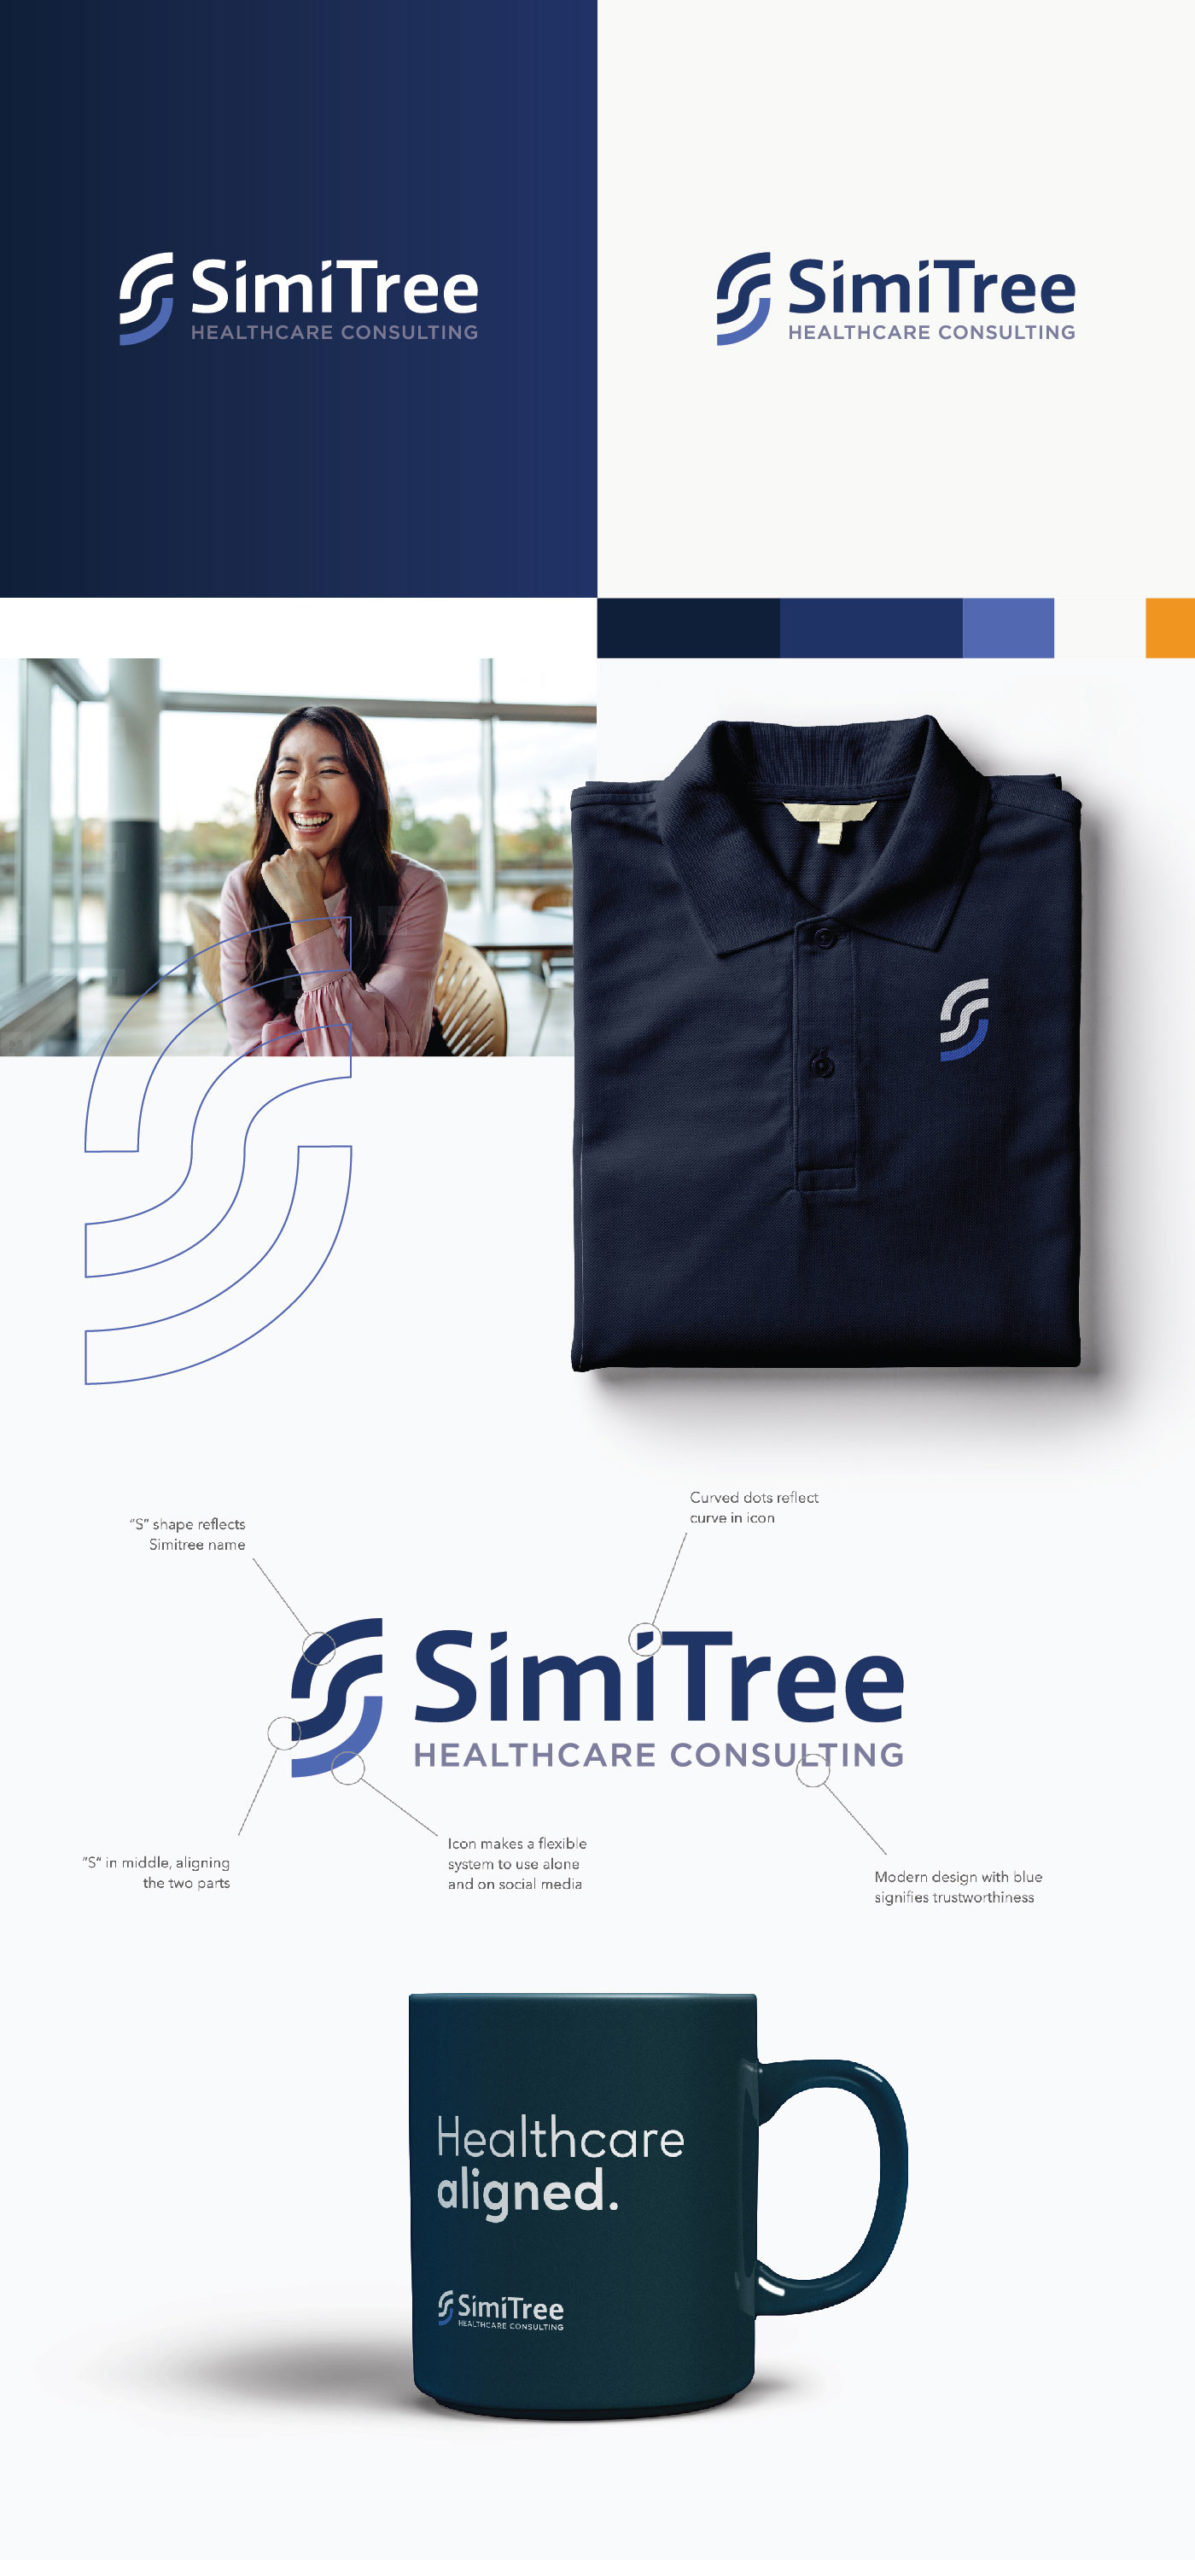 Creative expressions of the Simitree brand, including polos, coffee mugs and logo variations